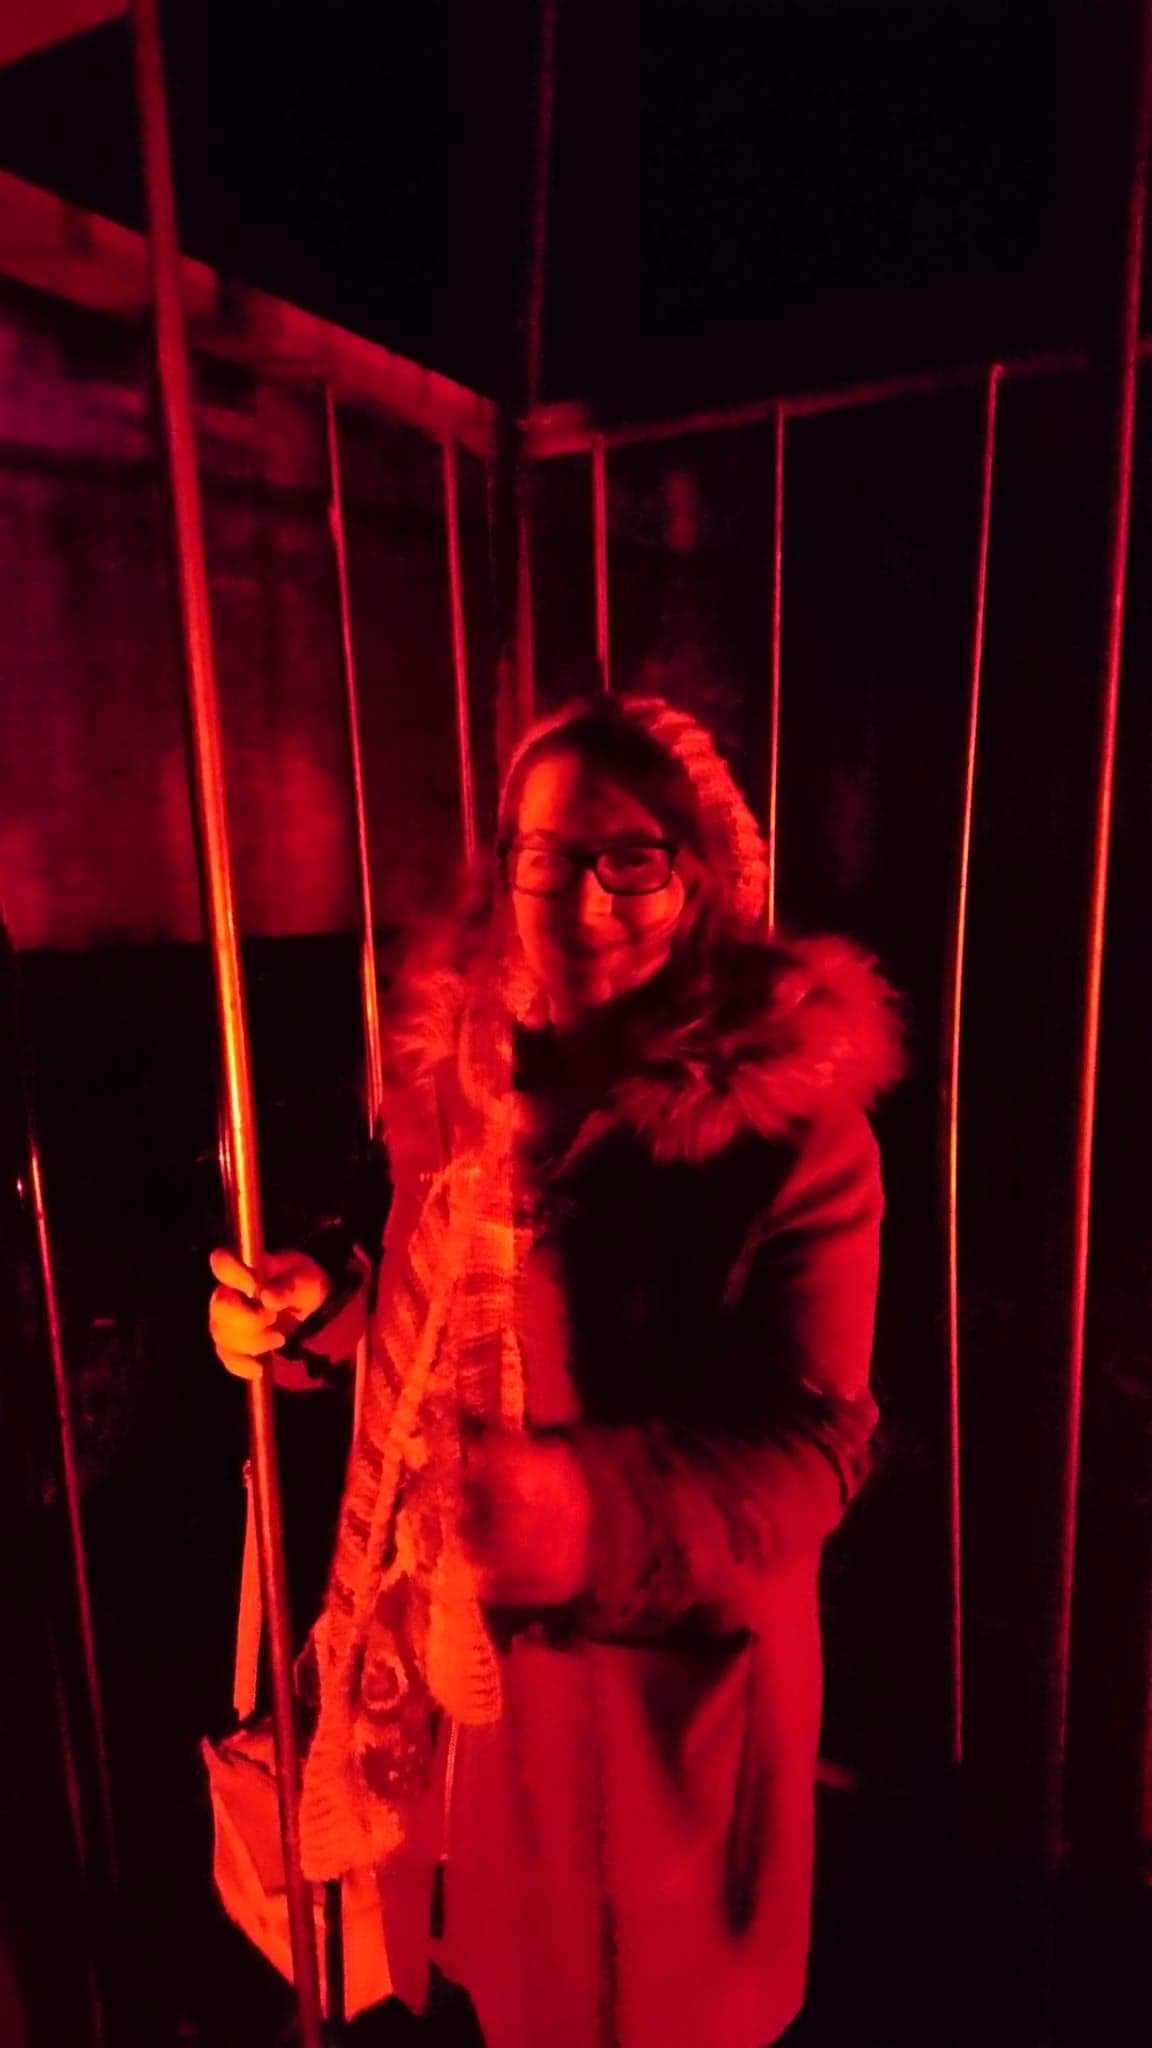 Night time photo of a young girl in a cage smiling with red lighting